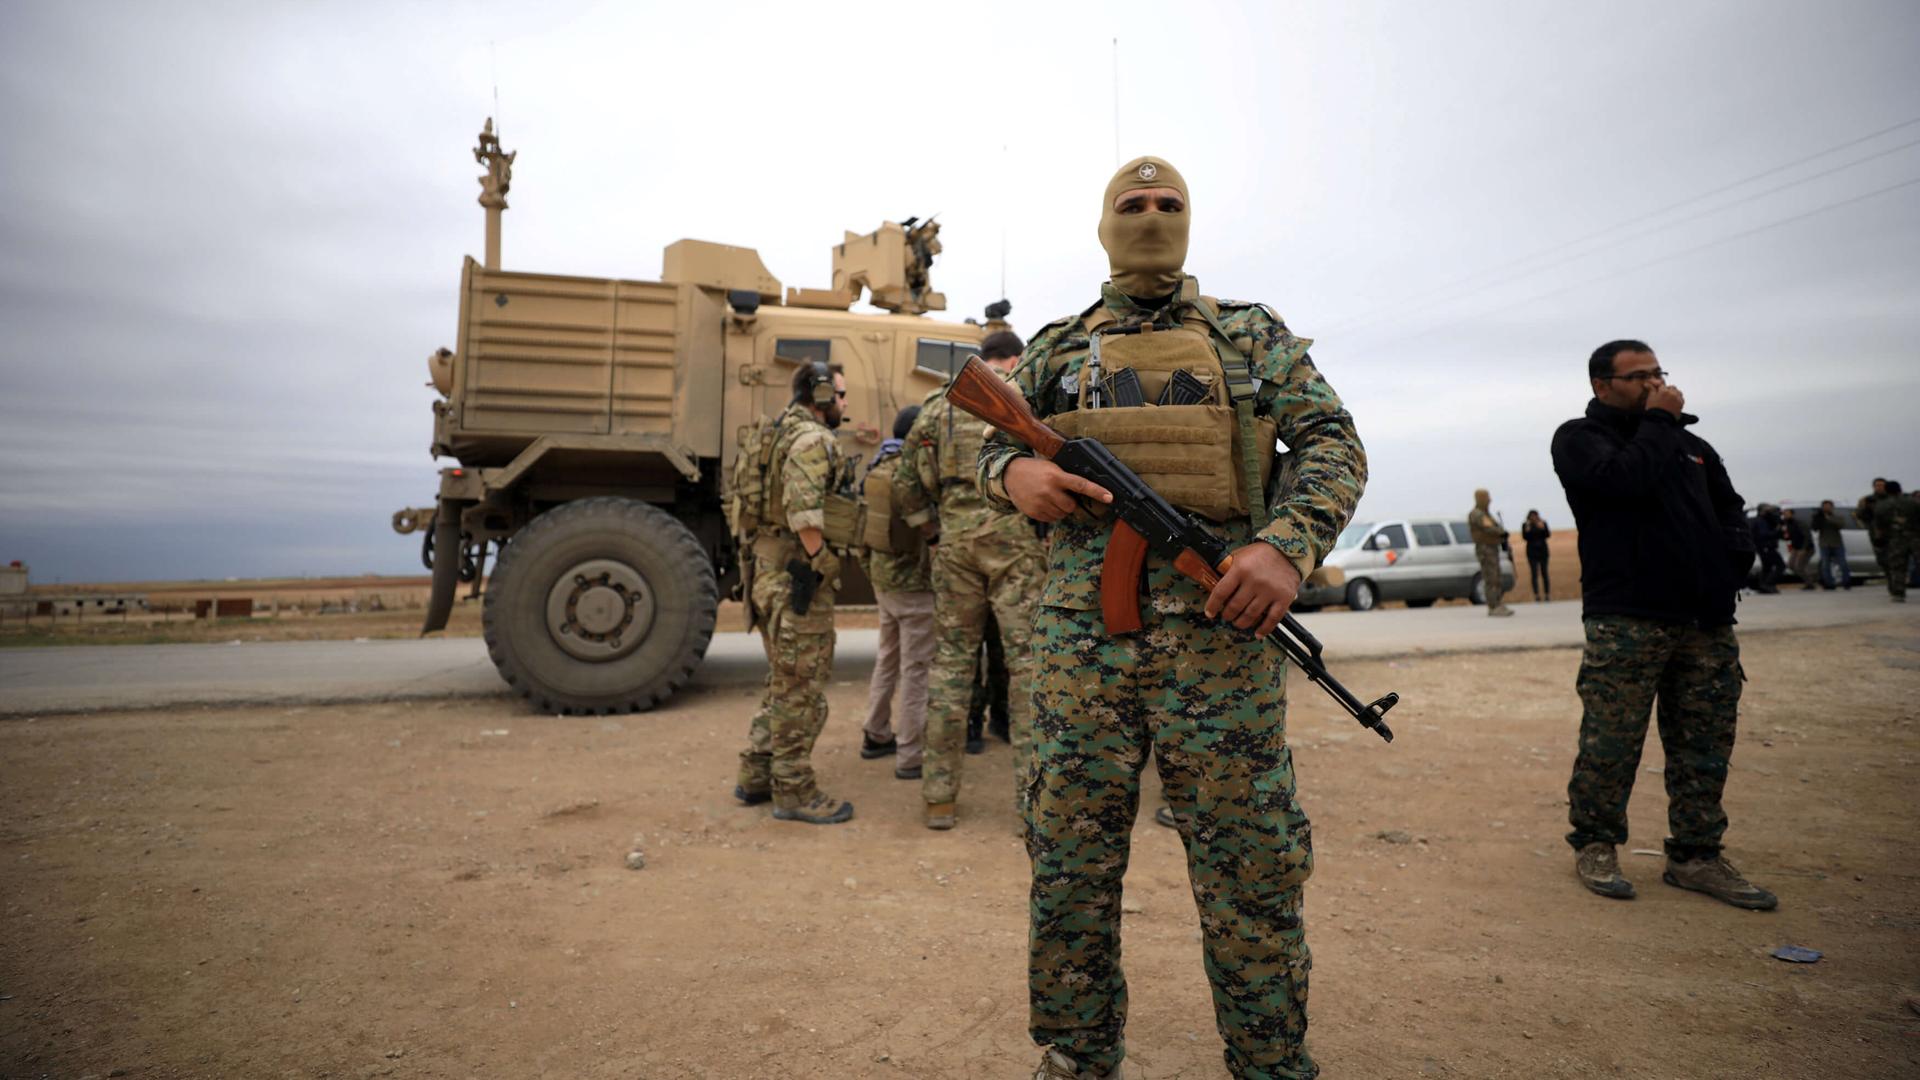 A masked Syria fighter stands in front of an American tank and some troops. 